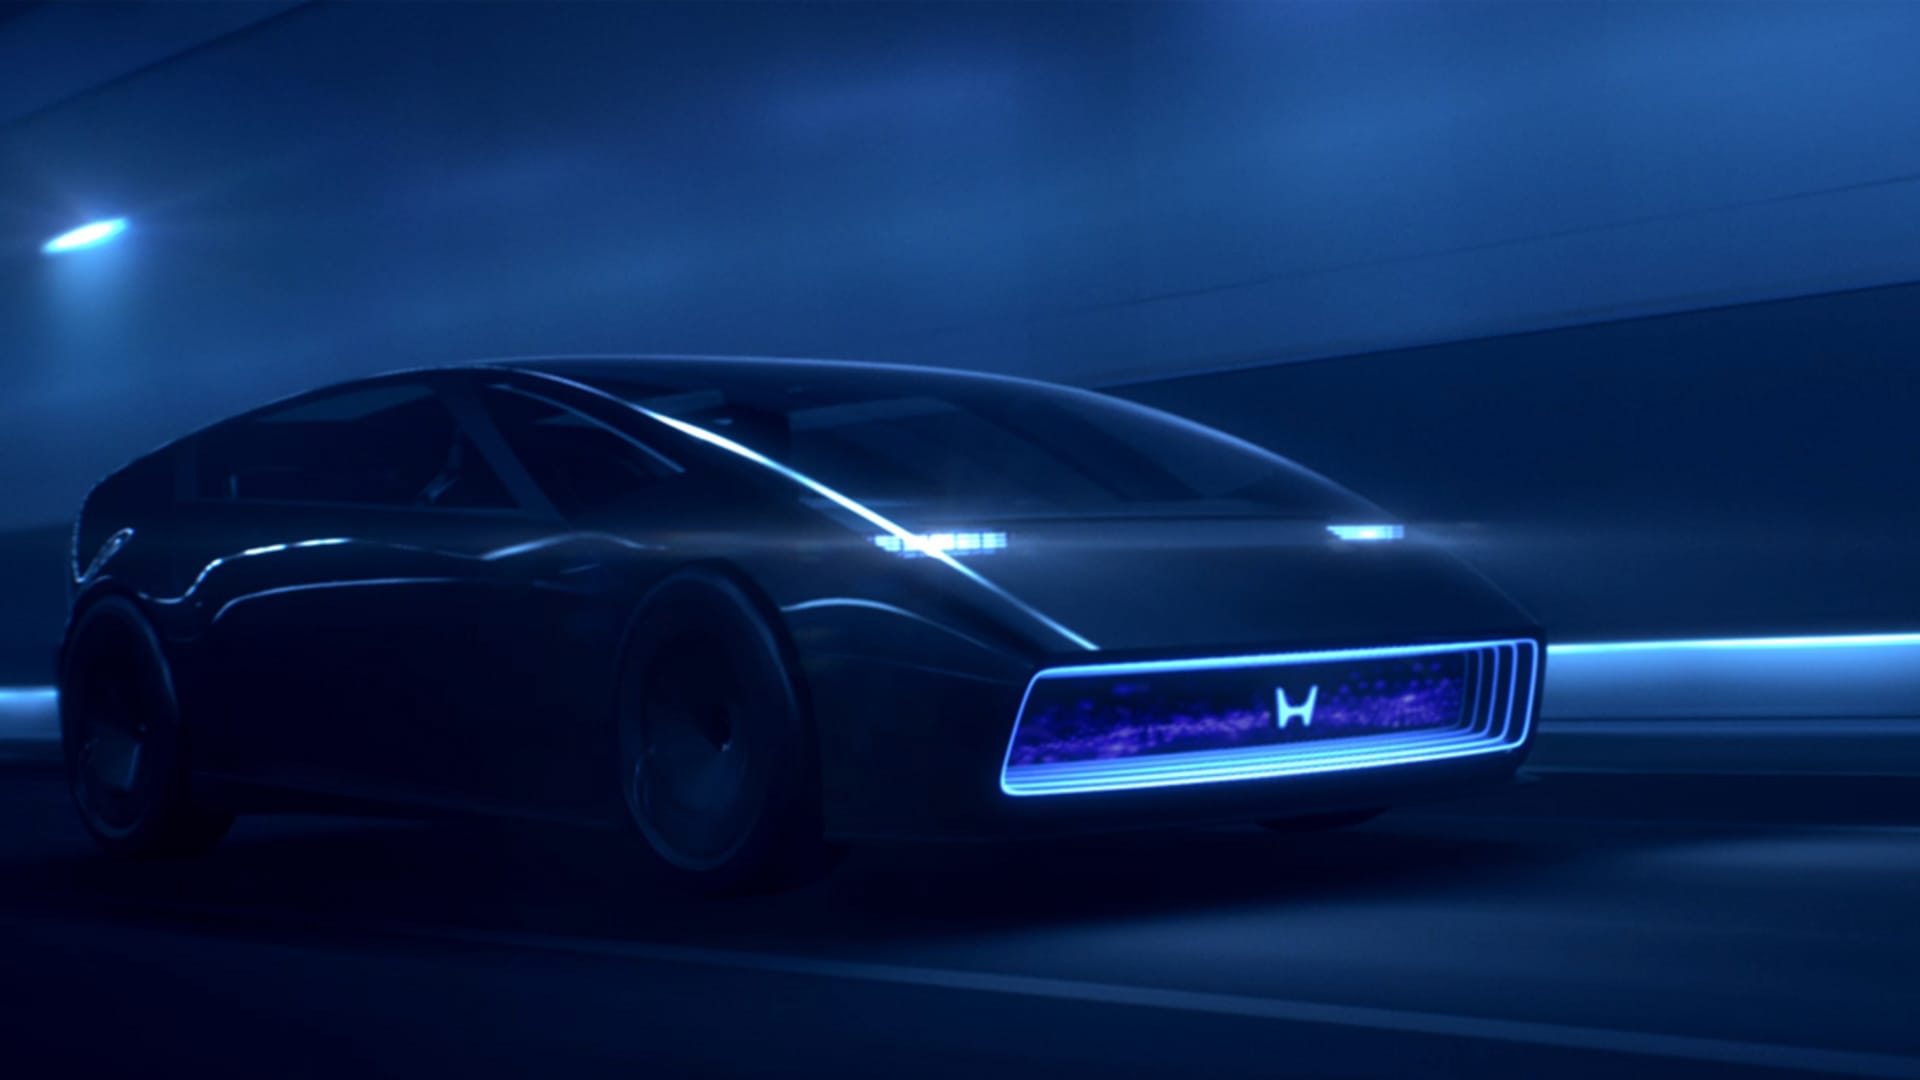 Honda teases new EVs with Space-Hub, Saloon concept cars